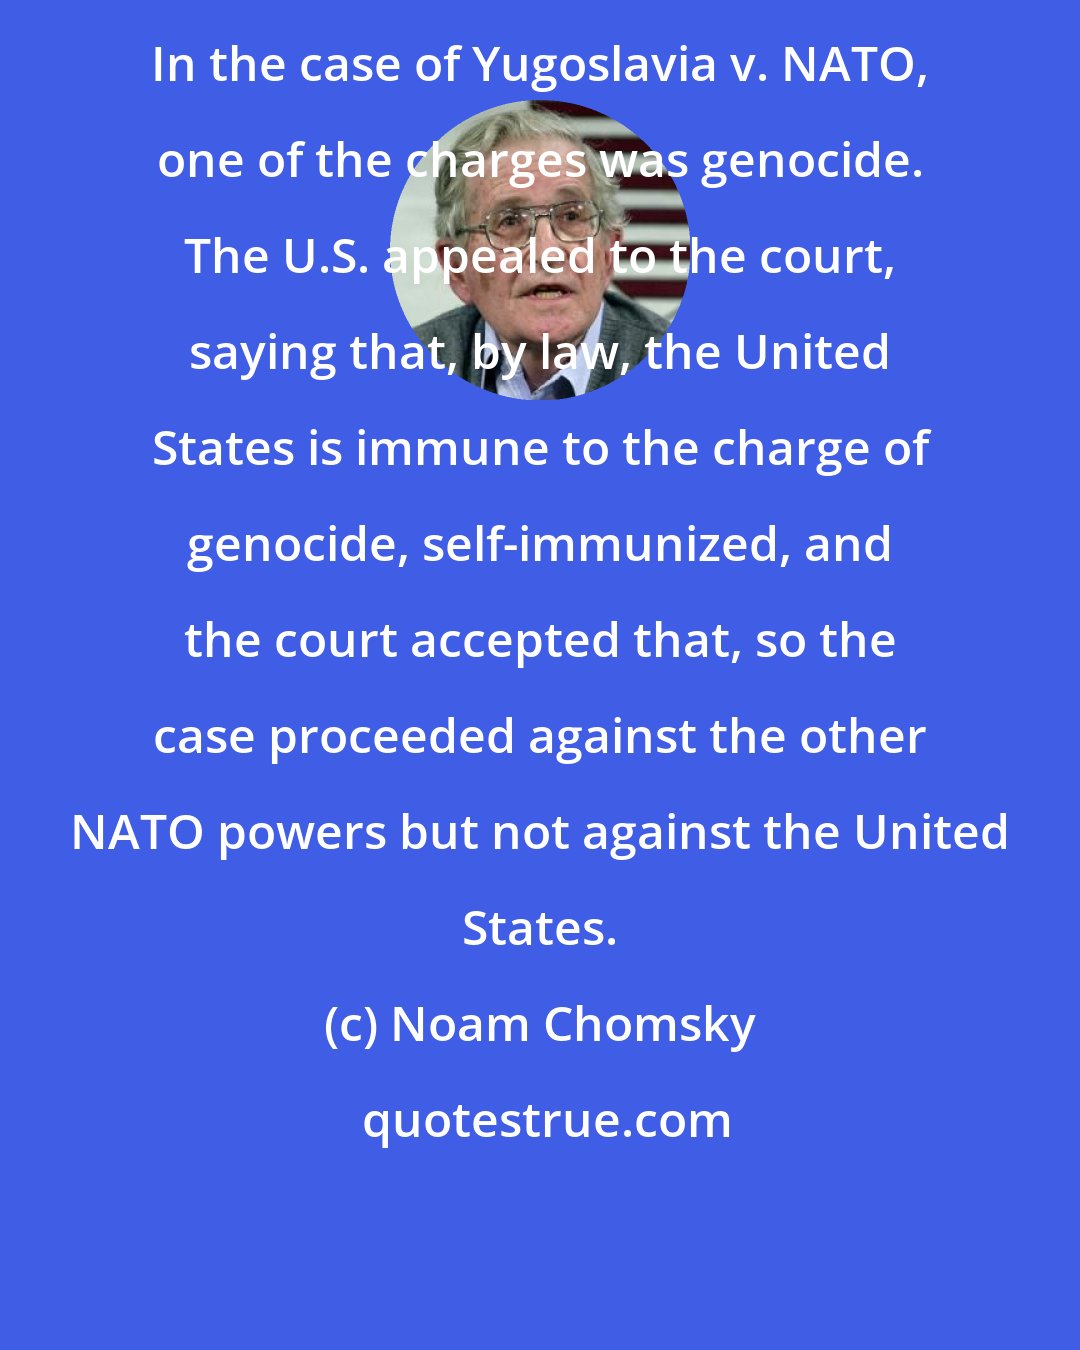 Noam Chomsky: In the case of Yugoslavia v. NATO, one of the charges was genocide. The U.S. appealed to the court, saying that, by law, the United States is immune to the charge of genocide, self-immunized, and the court accepted that, so the case proceeded against the other NATO powers but not against the United States.